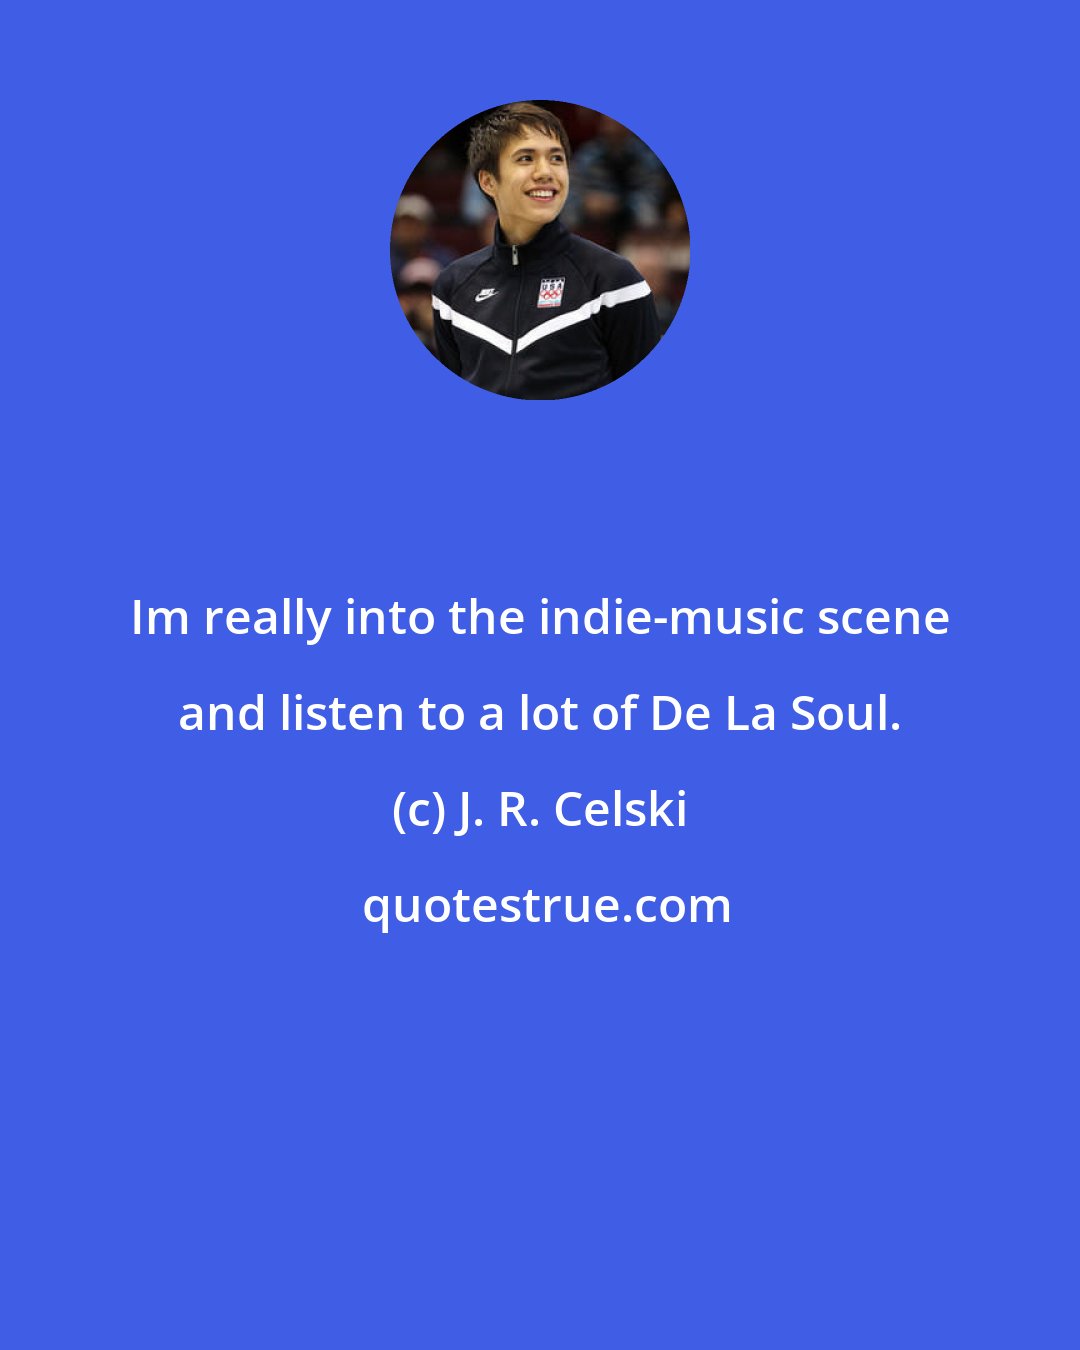 J. R. Celski: Im really into the indie-music scene and listen to a lot of De La Soul.